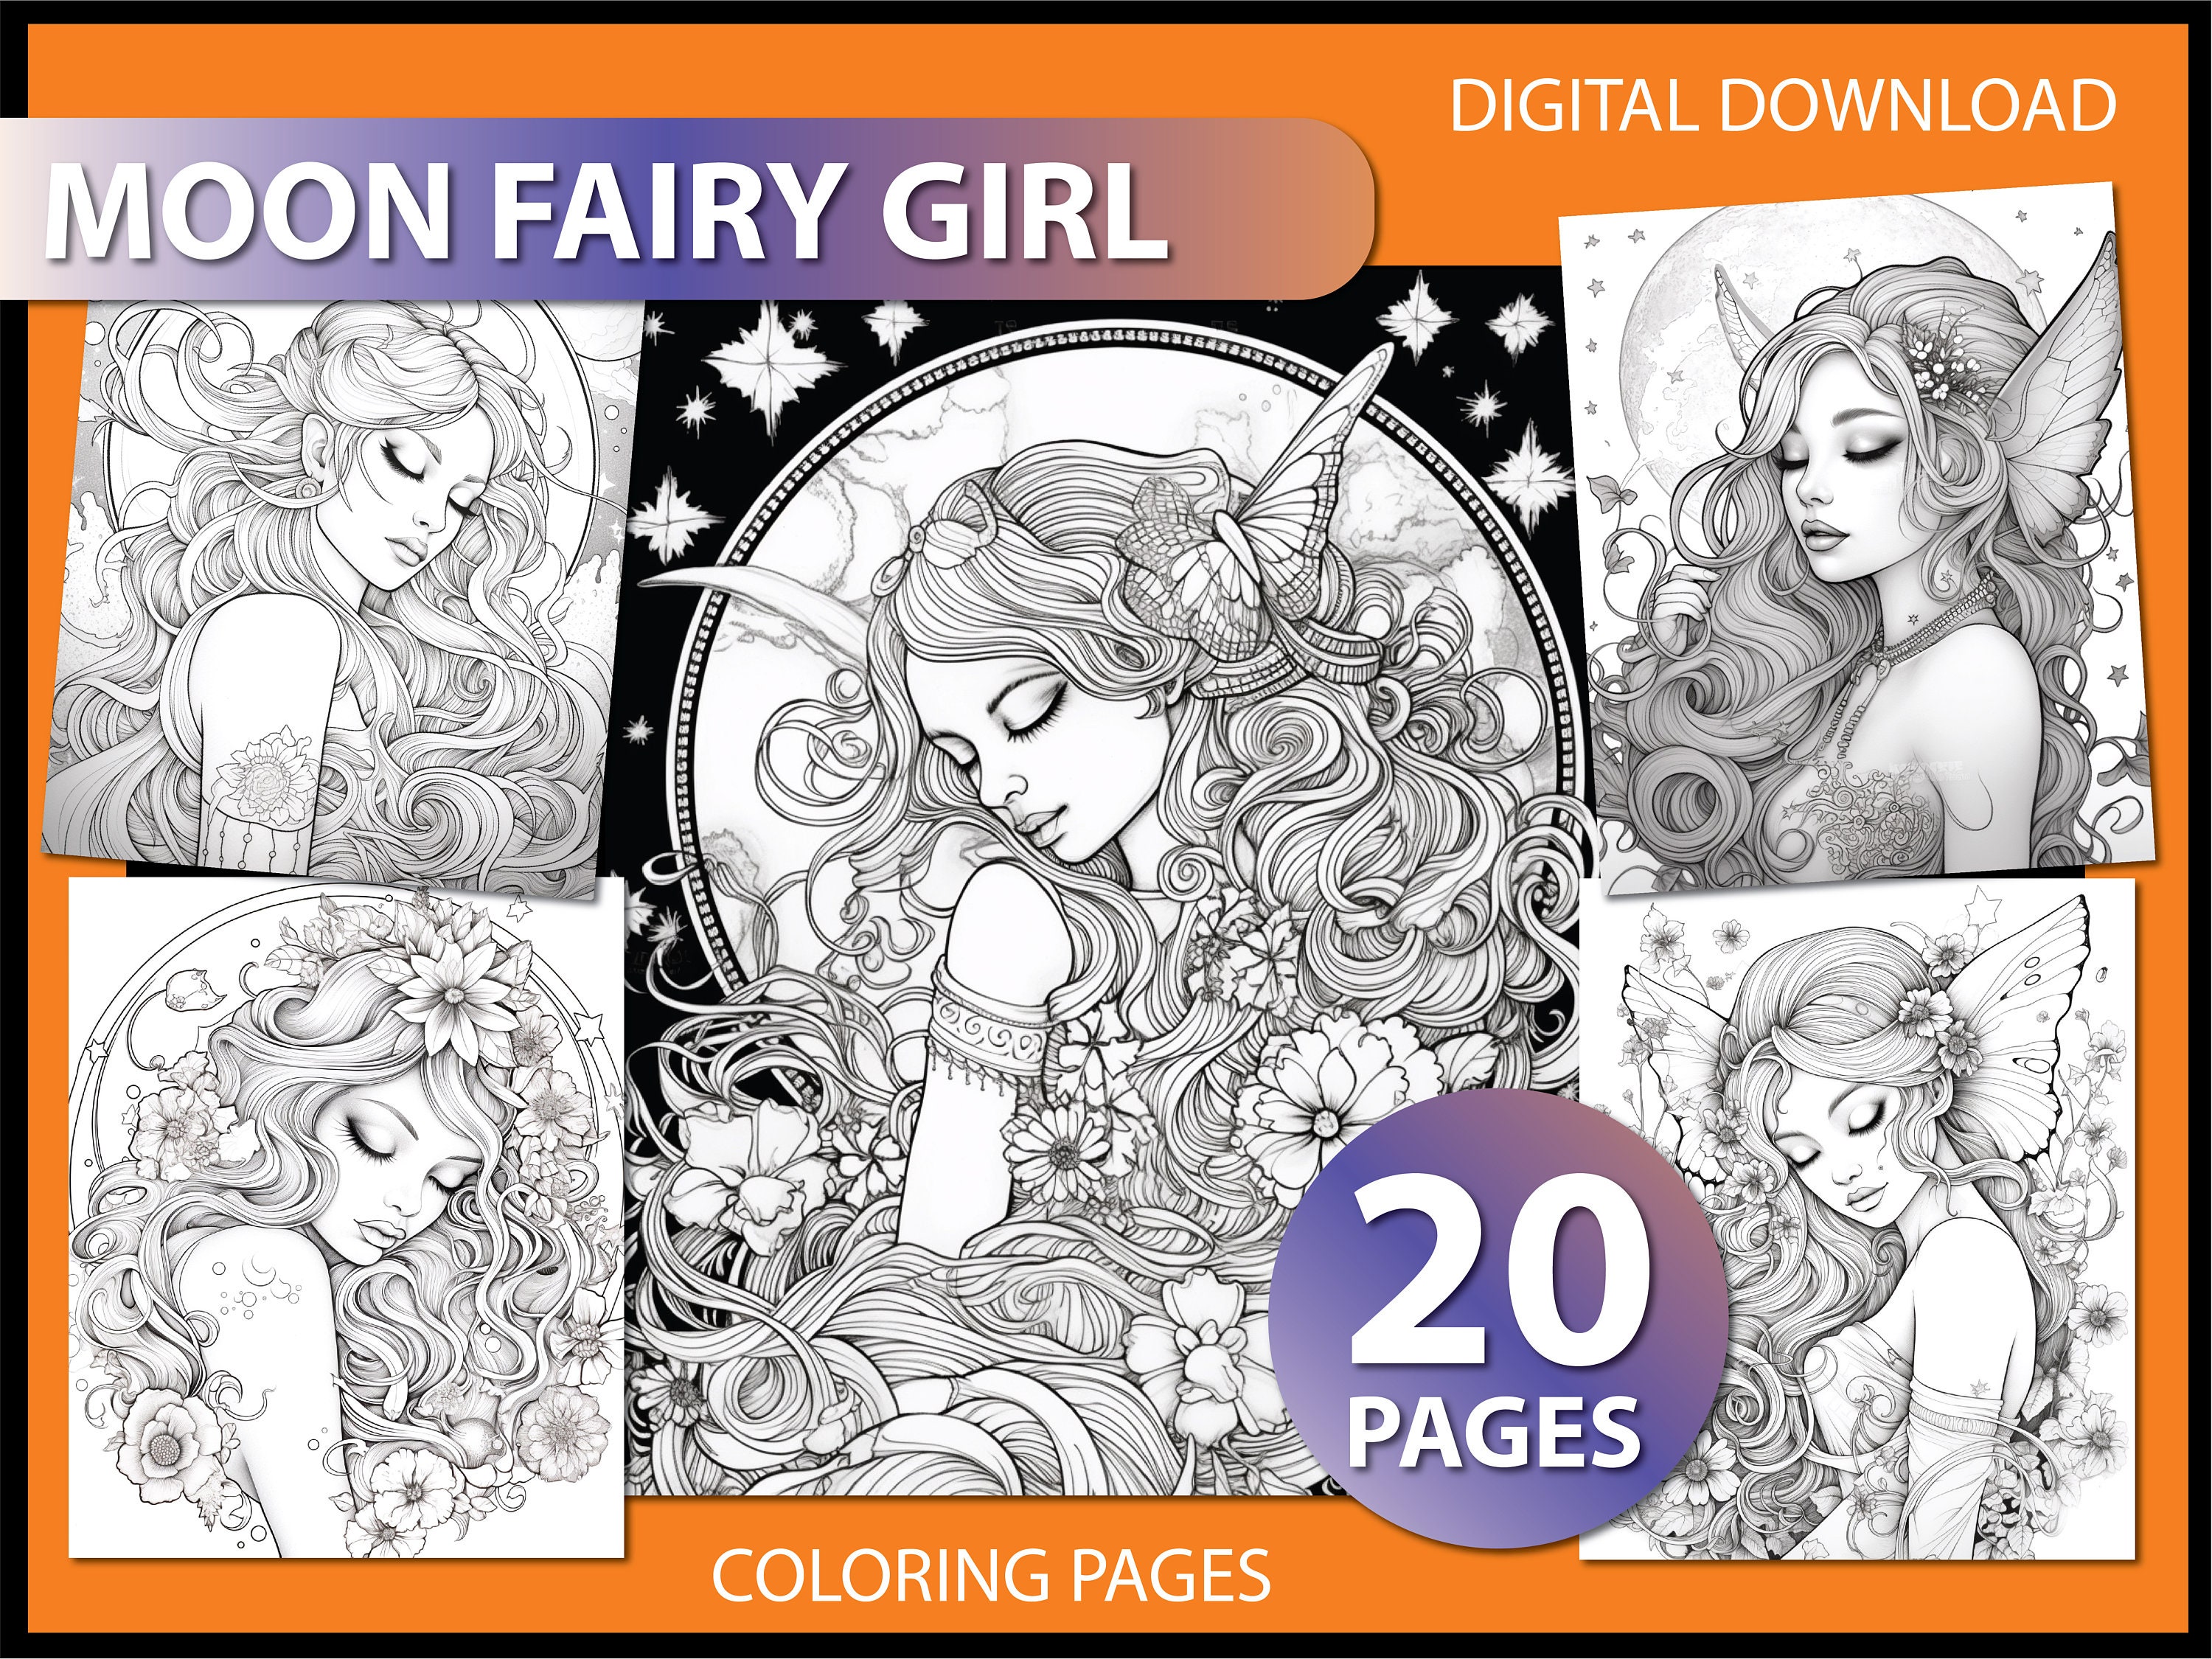 Moon Fairy Coloring Pages for Adults Coloring Book Gift - Etsy